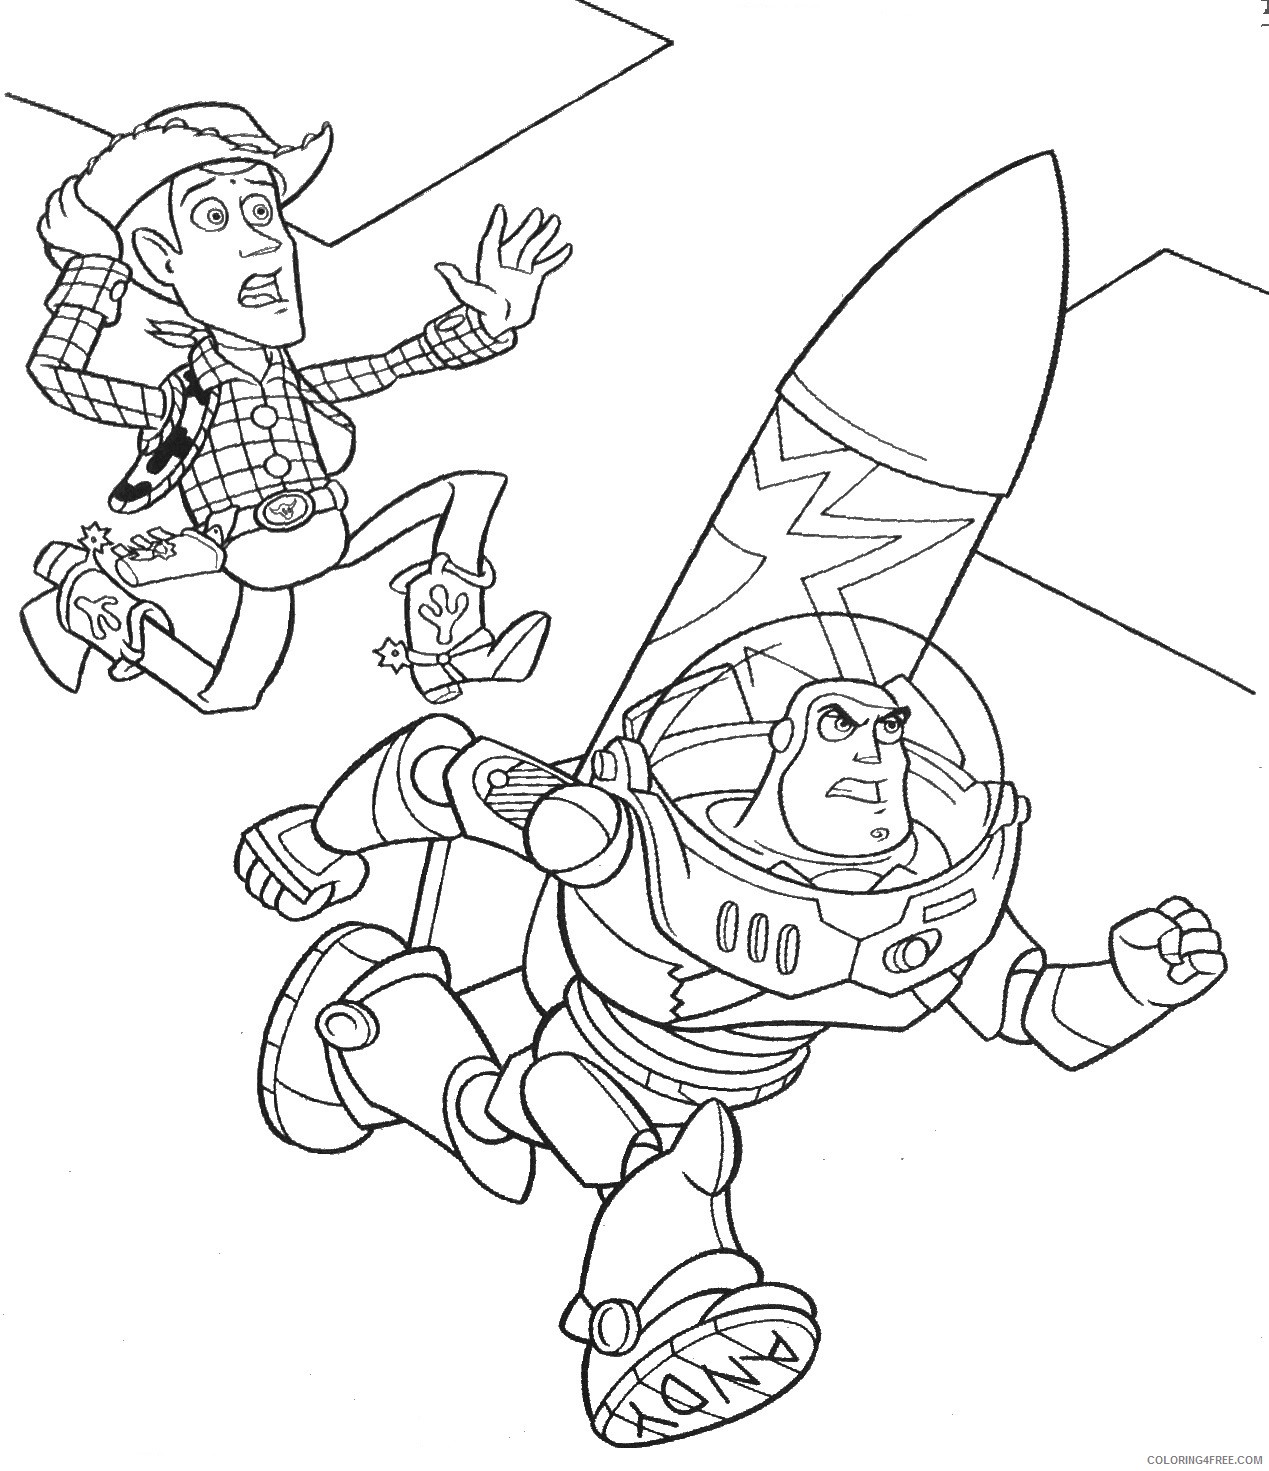 buzz lightyear coloring pages missile launch Coloring4free